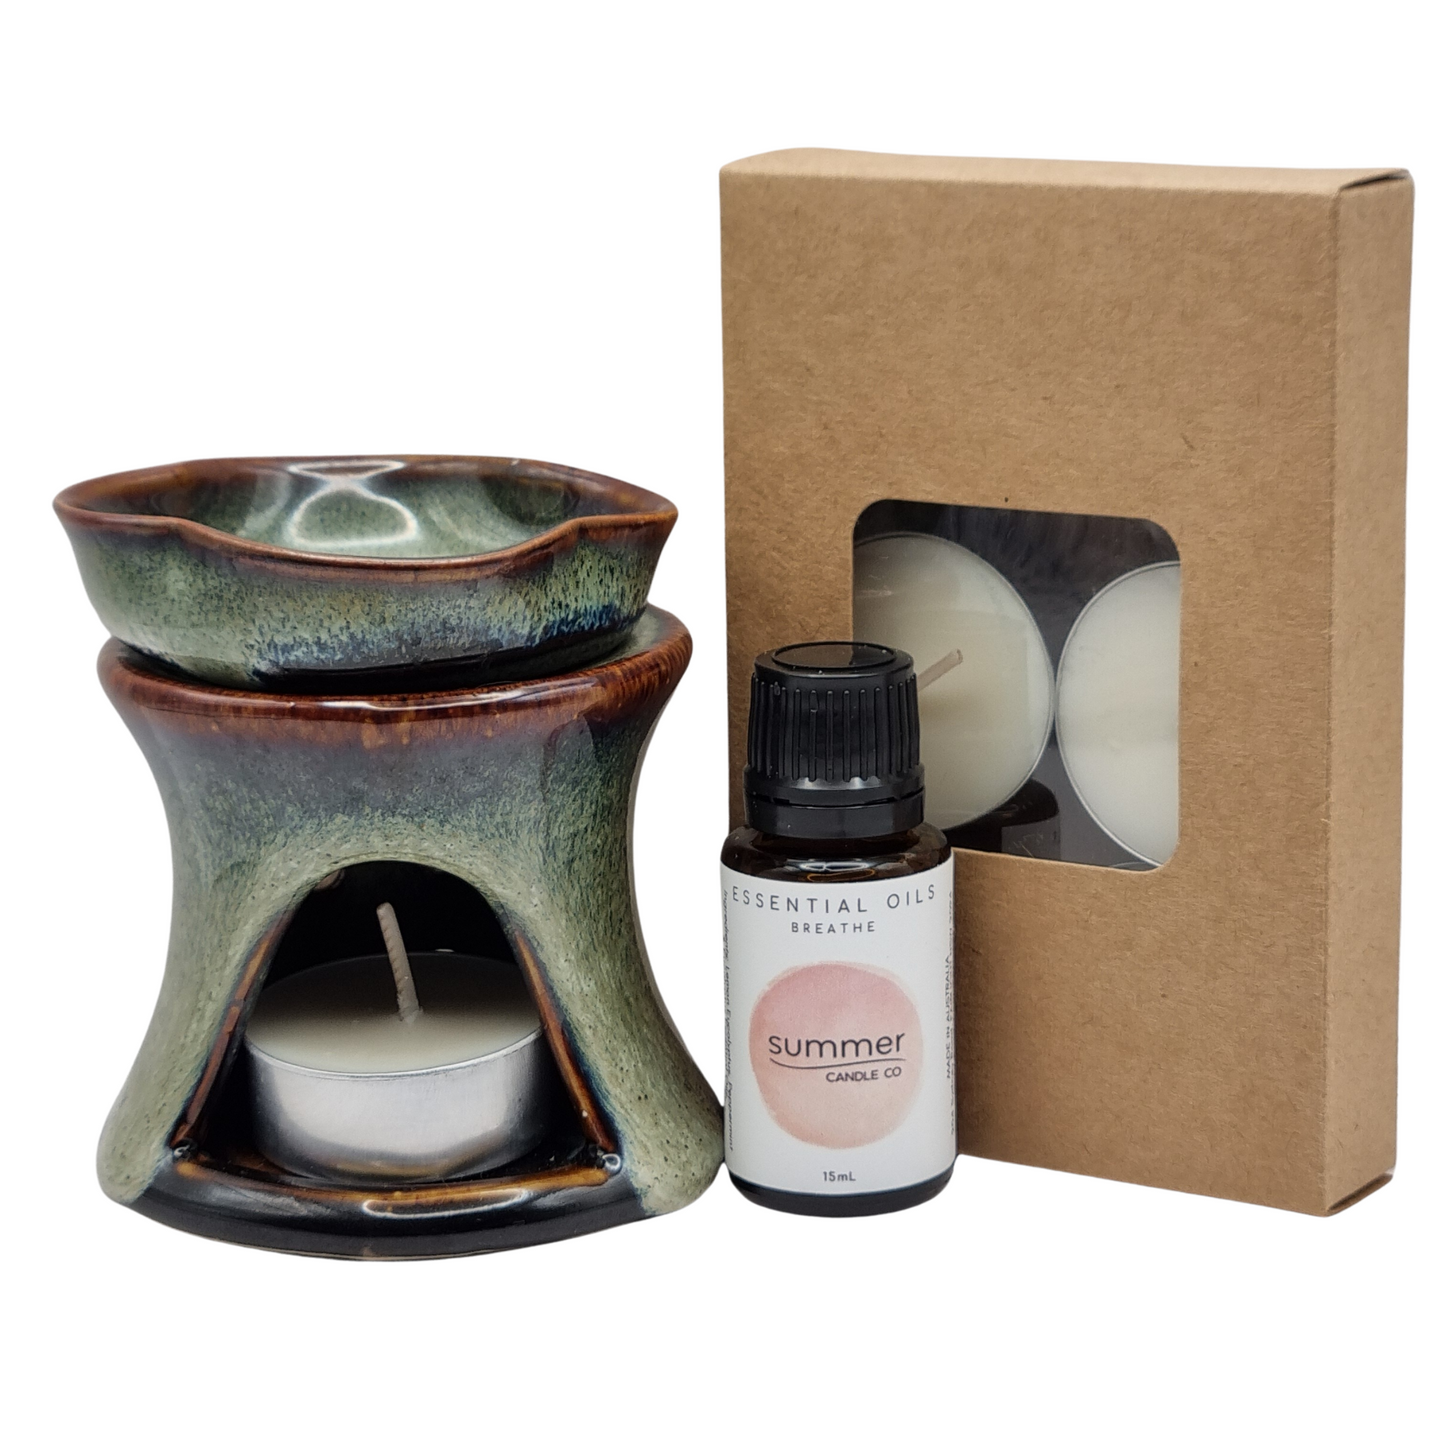 Bundle Pack Ceramic Green Oil Burner with Breathe Essential Oil and 6 pack of Tealights